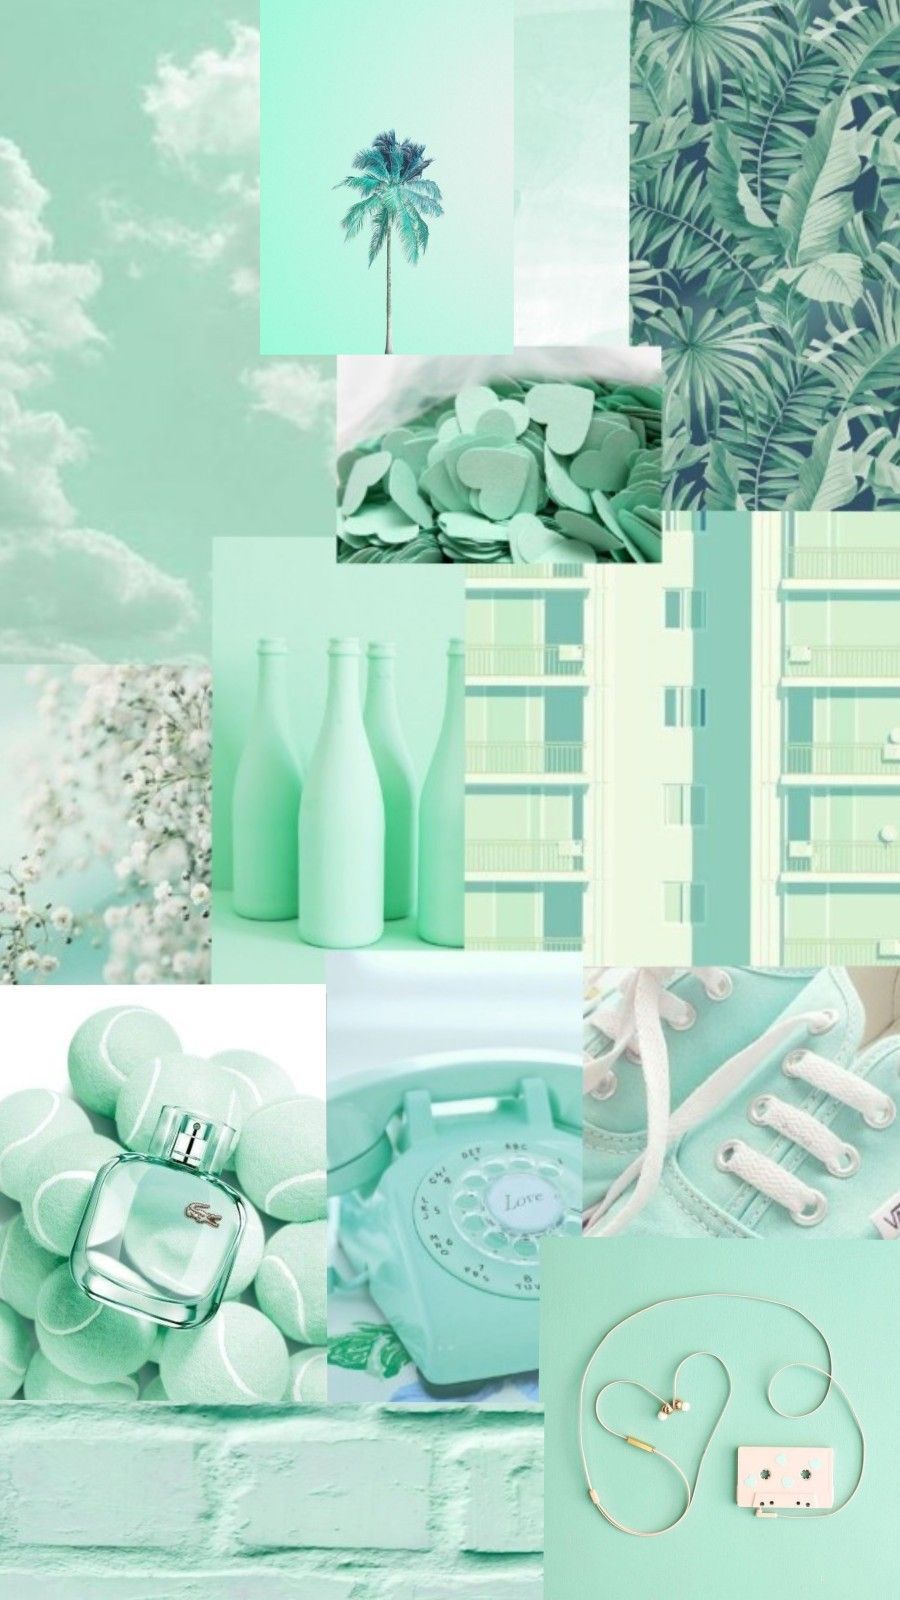 A collage of various mint green items including a phone, bottle, and a pair of shoes. - Mint green, pastel green